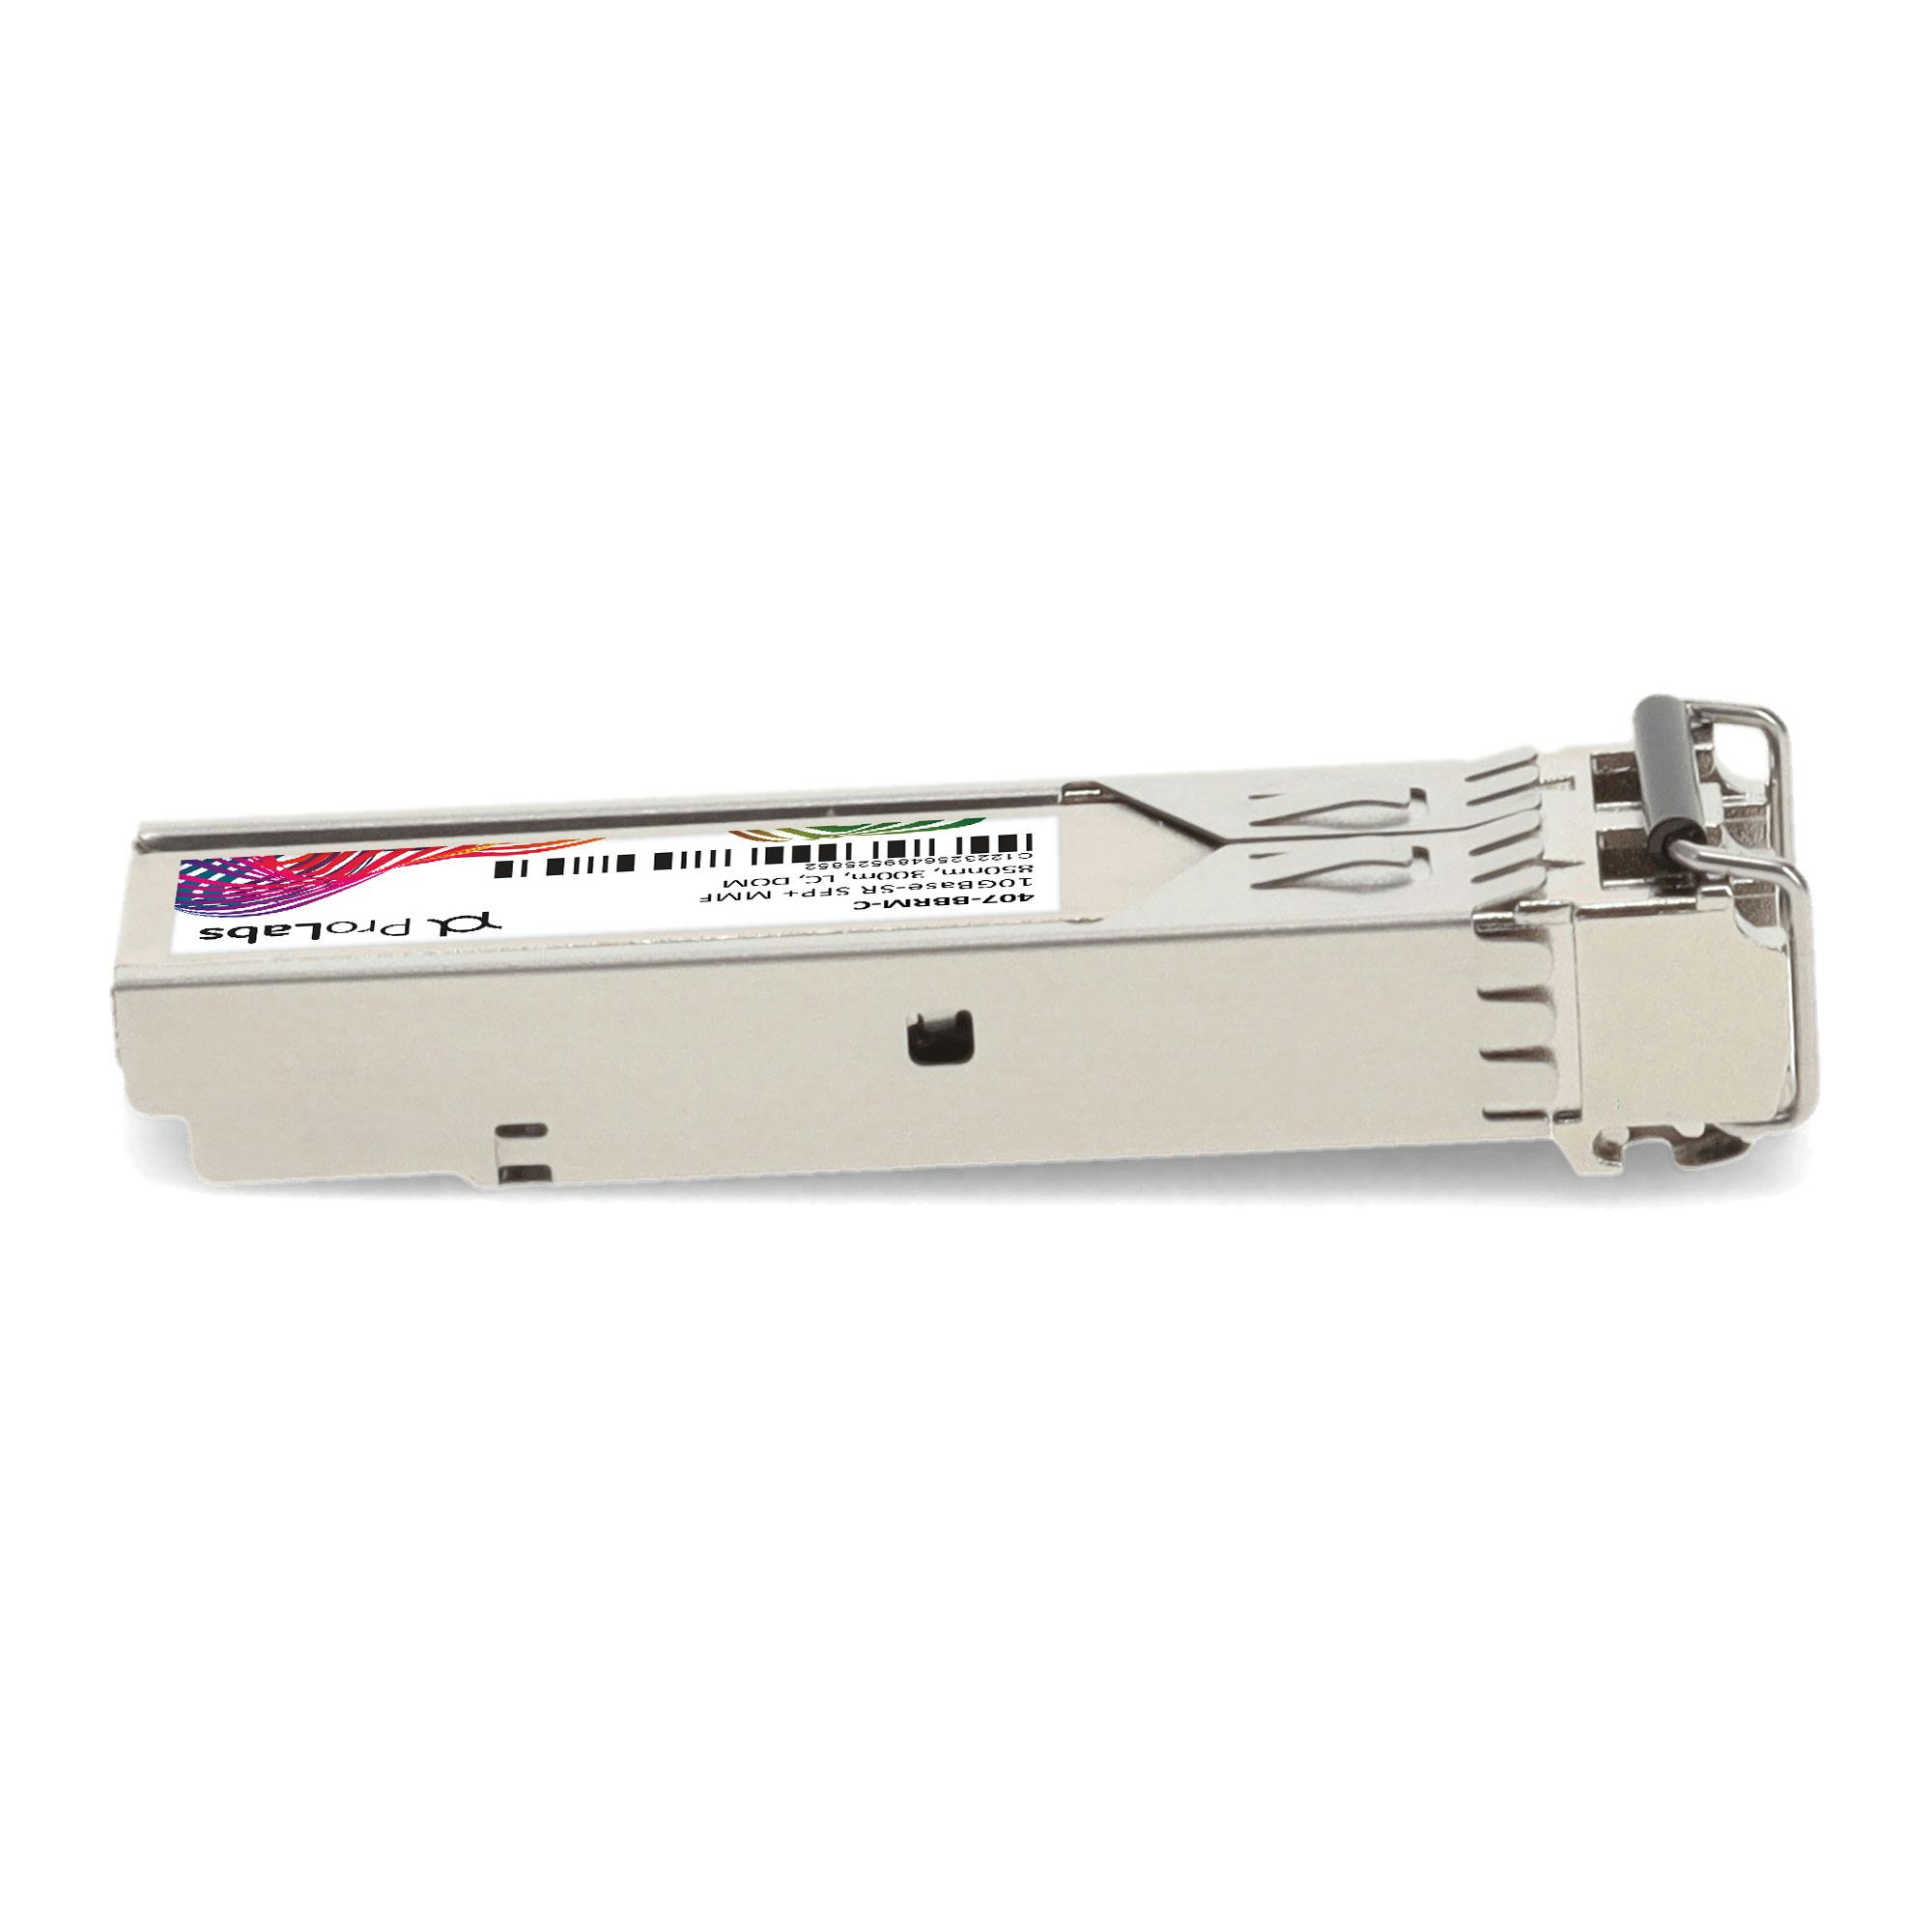 10GBase-SR 300m for Dell PowerEdge T440 Compatible 407-BBRM SFP